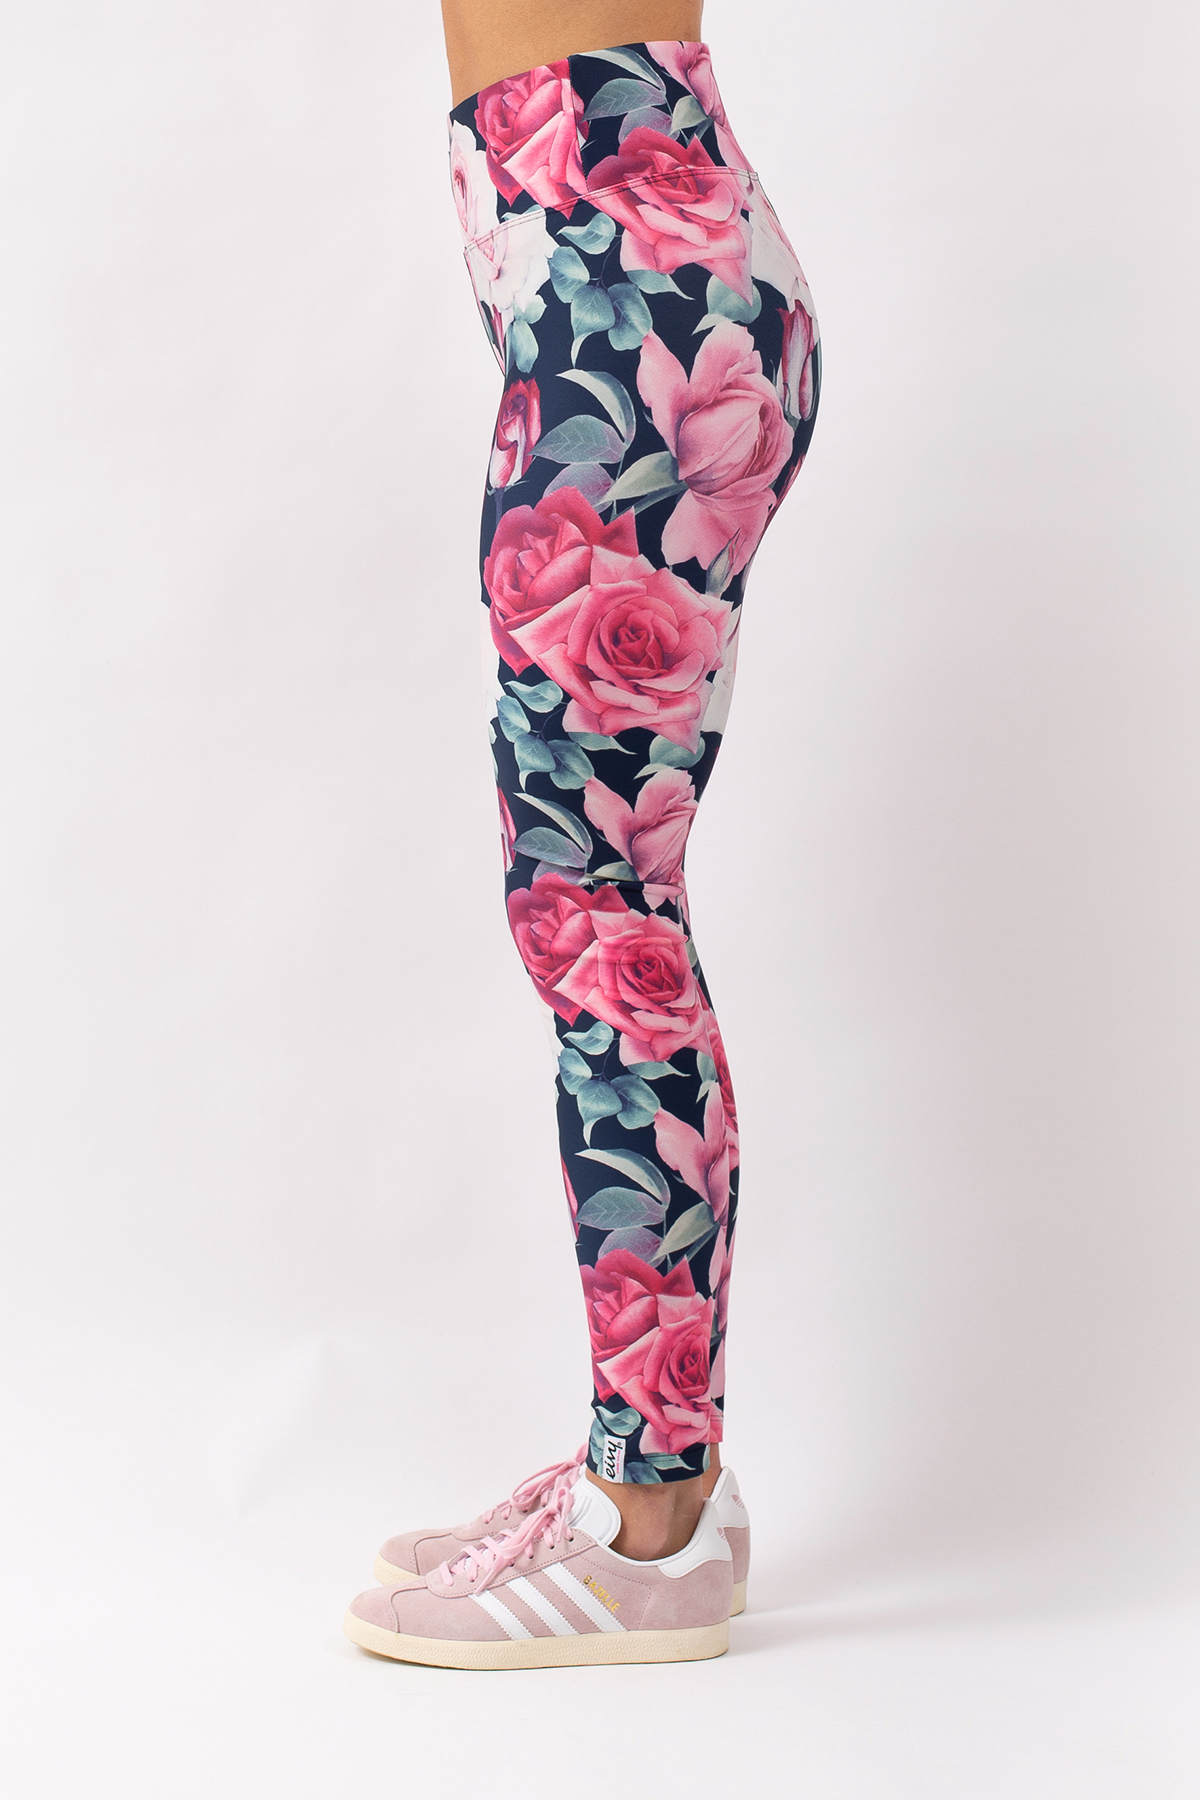 Base Layer | Icecold Tights - Winter Blossom | L